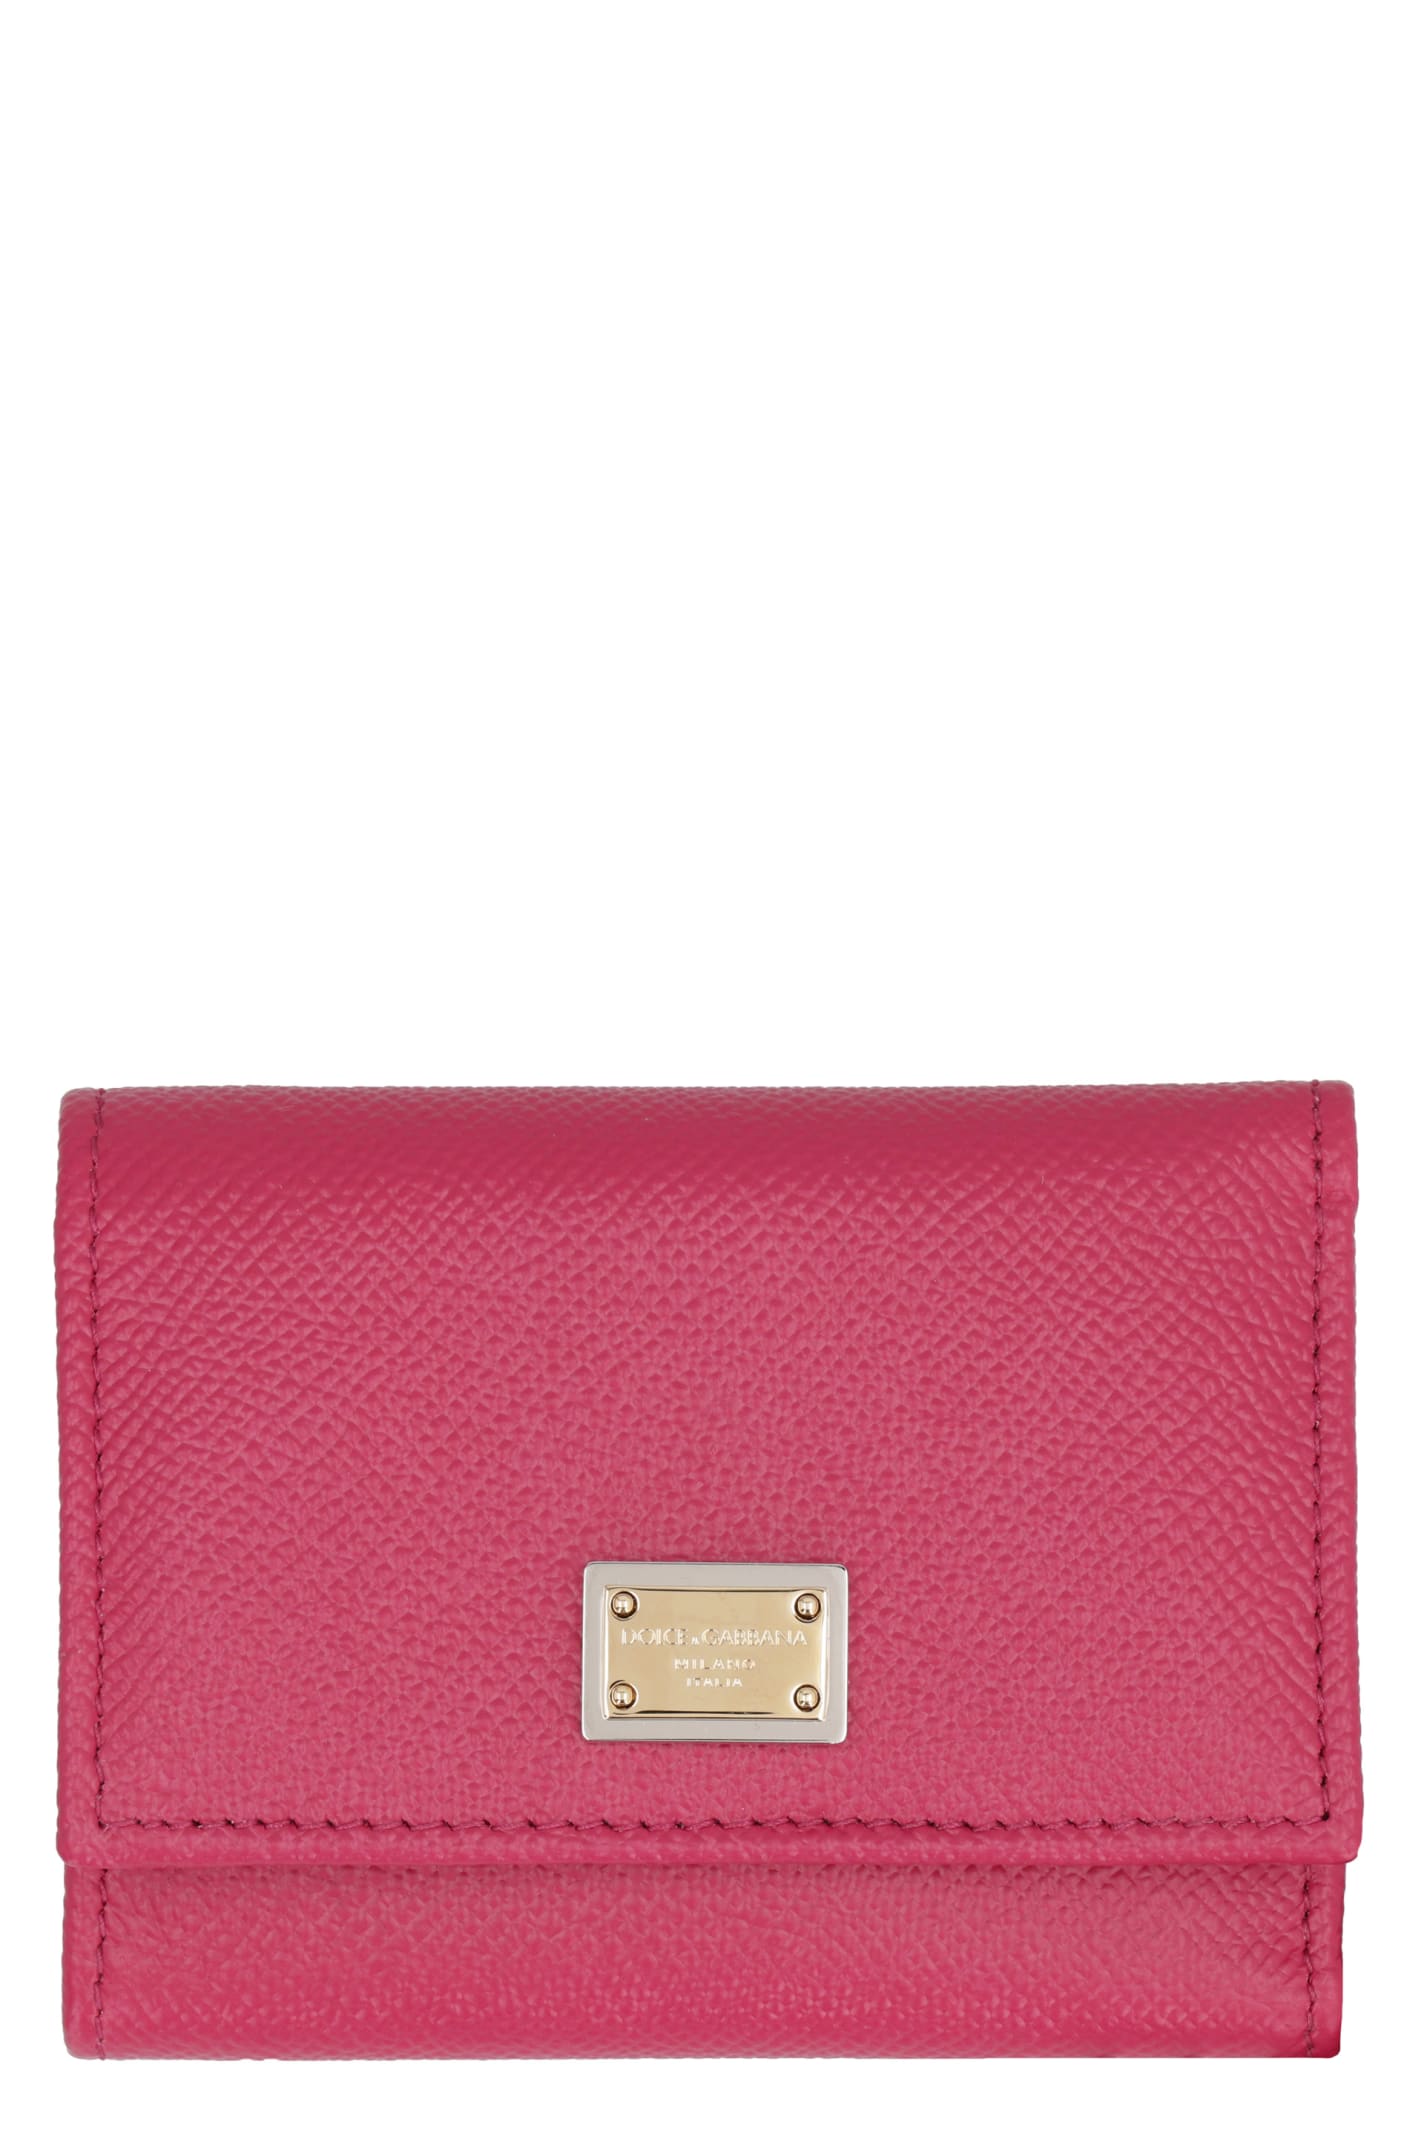 Dolce & Gabbana Dauphine Compact Wallet In Pink